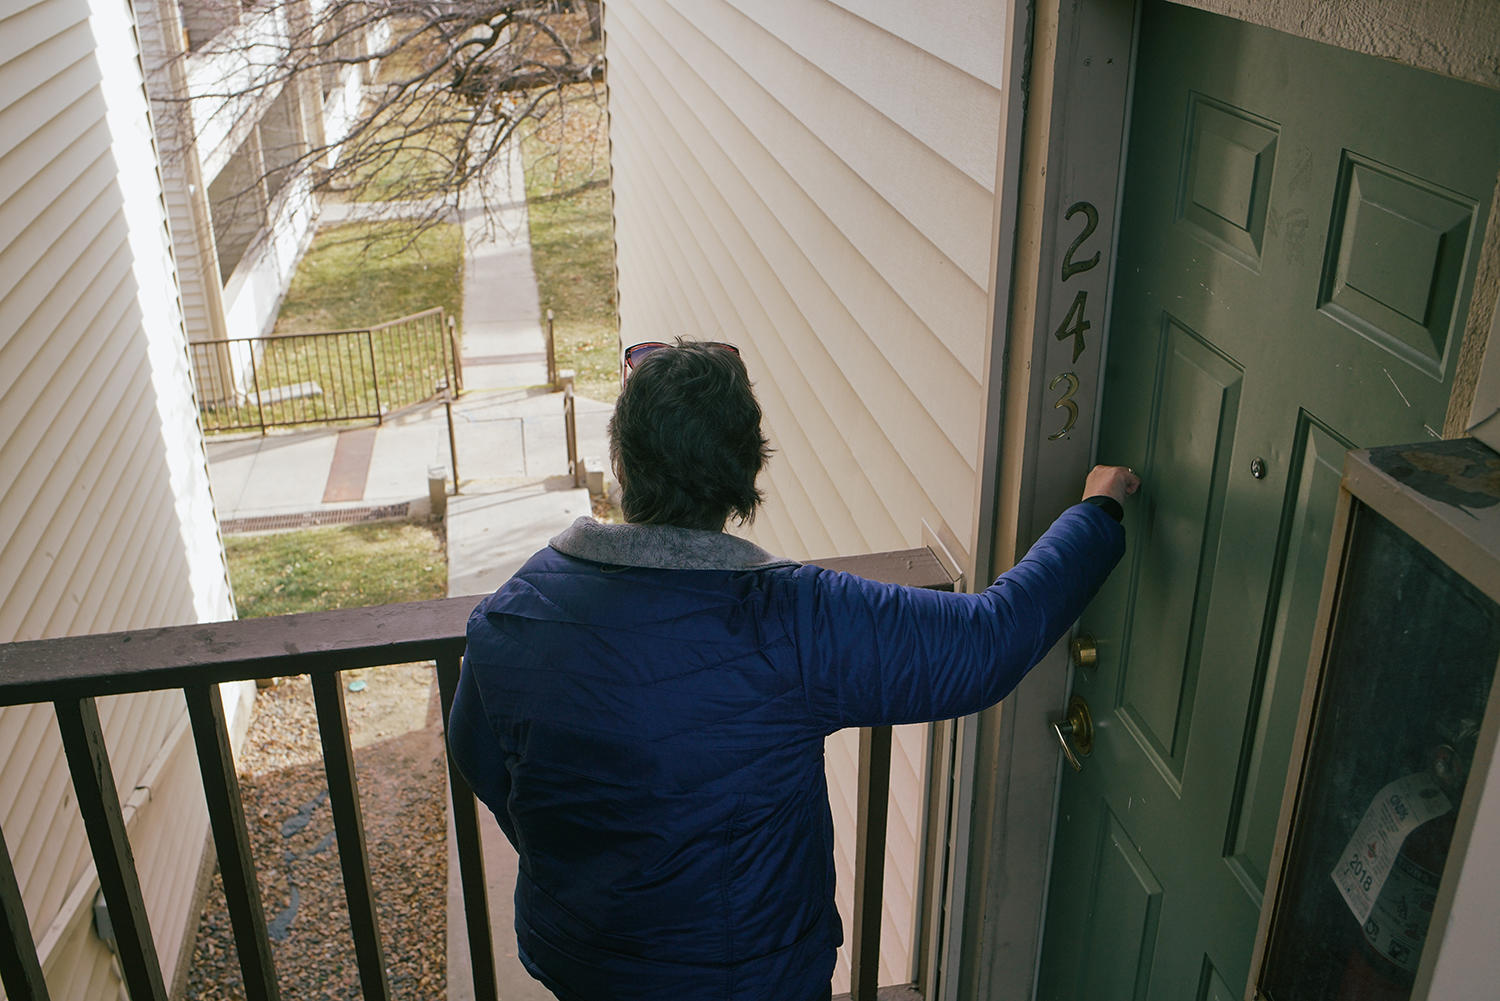 Lisa Bryant, a clinical case manager with Mental Health Center of Denver, knocks on the apartment door of a program participant.